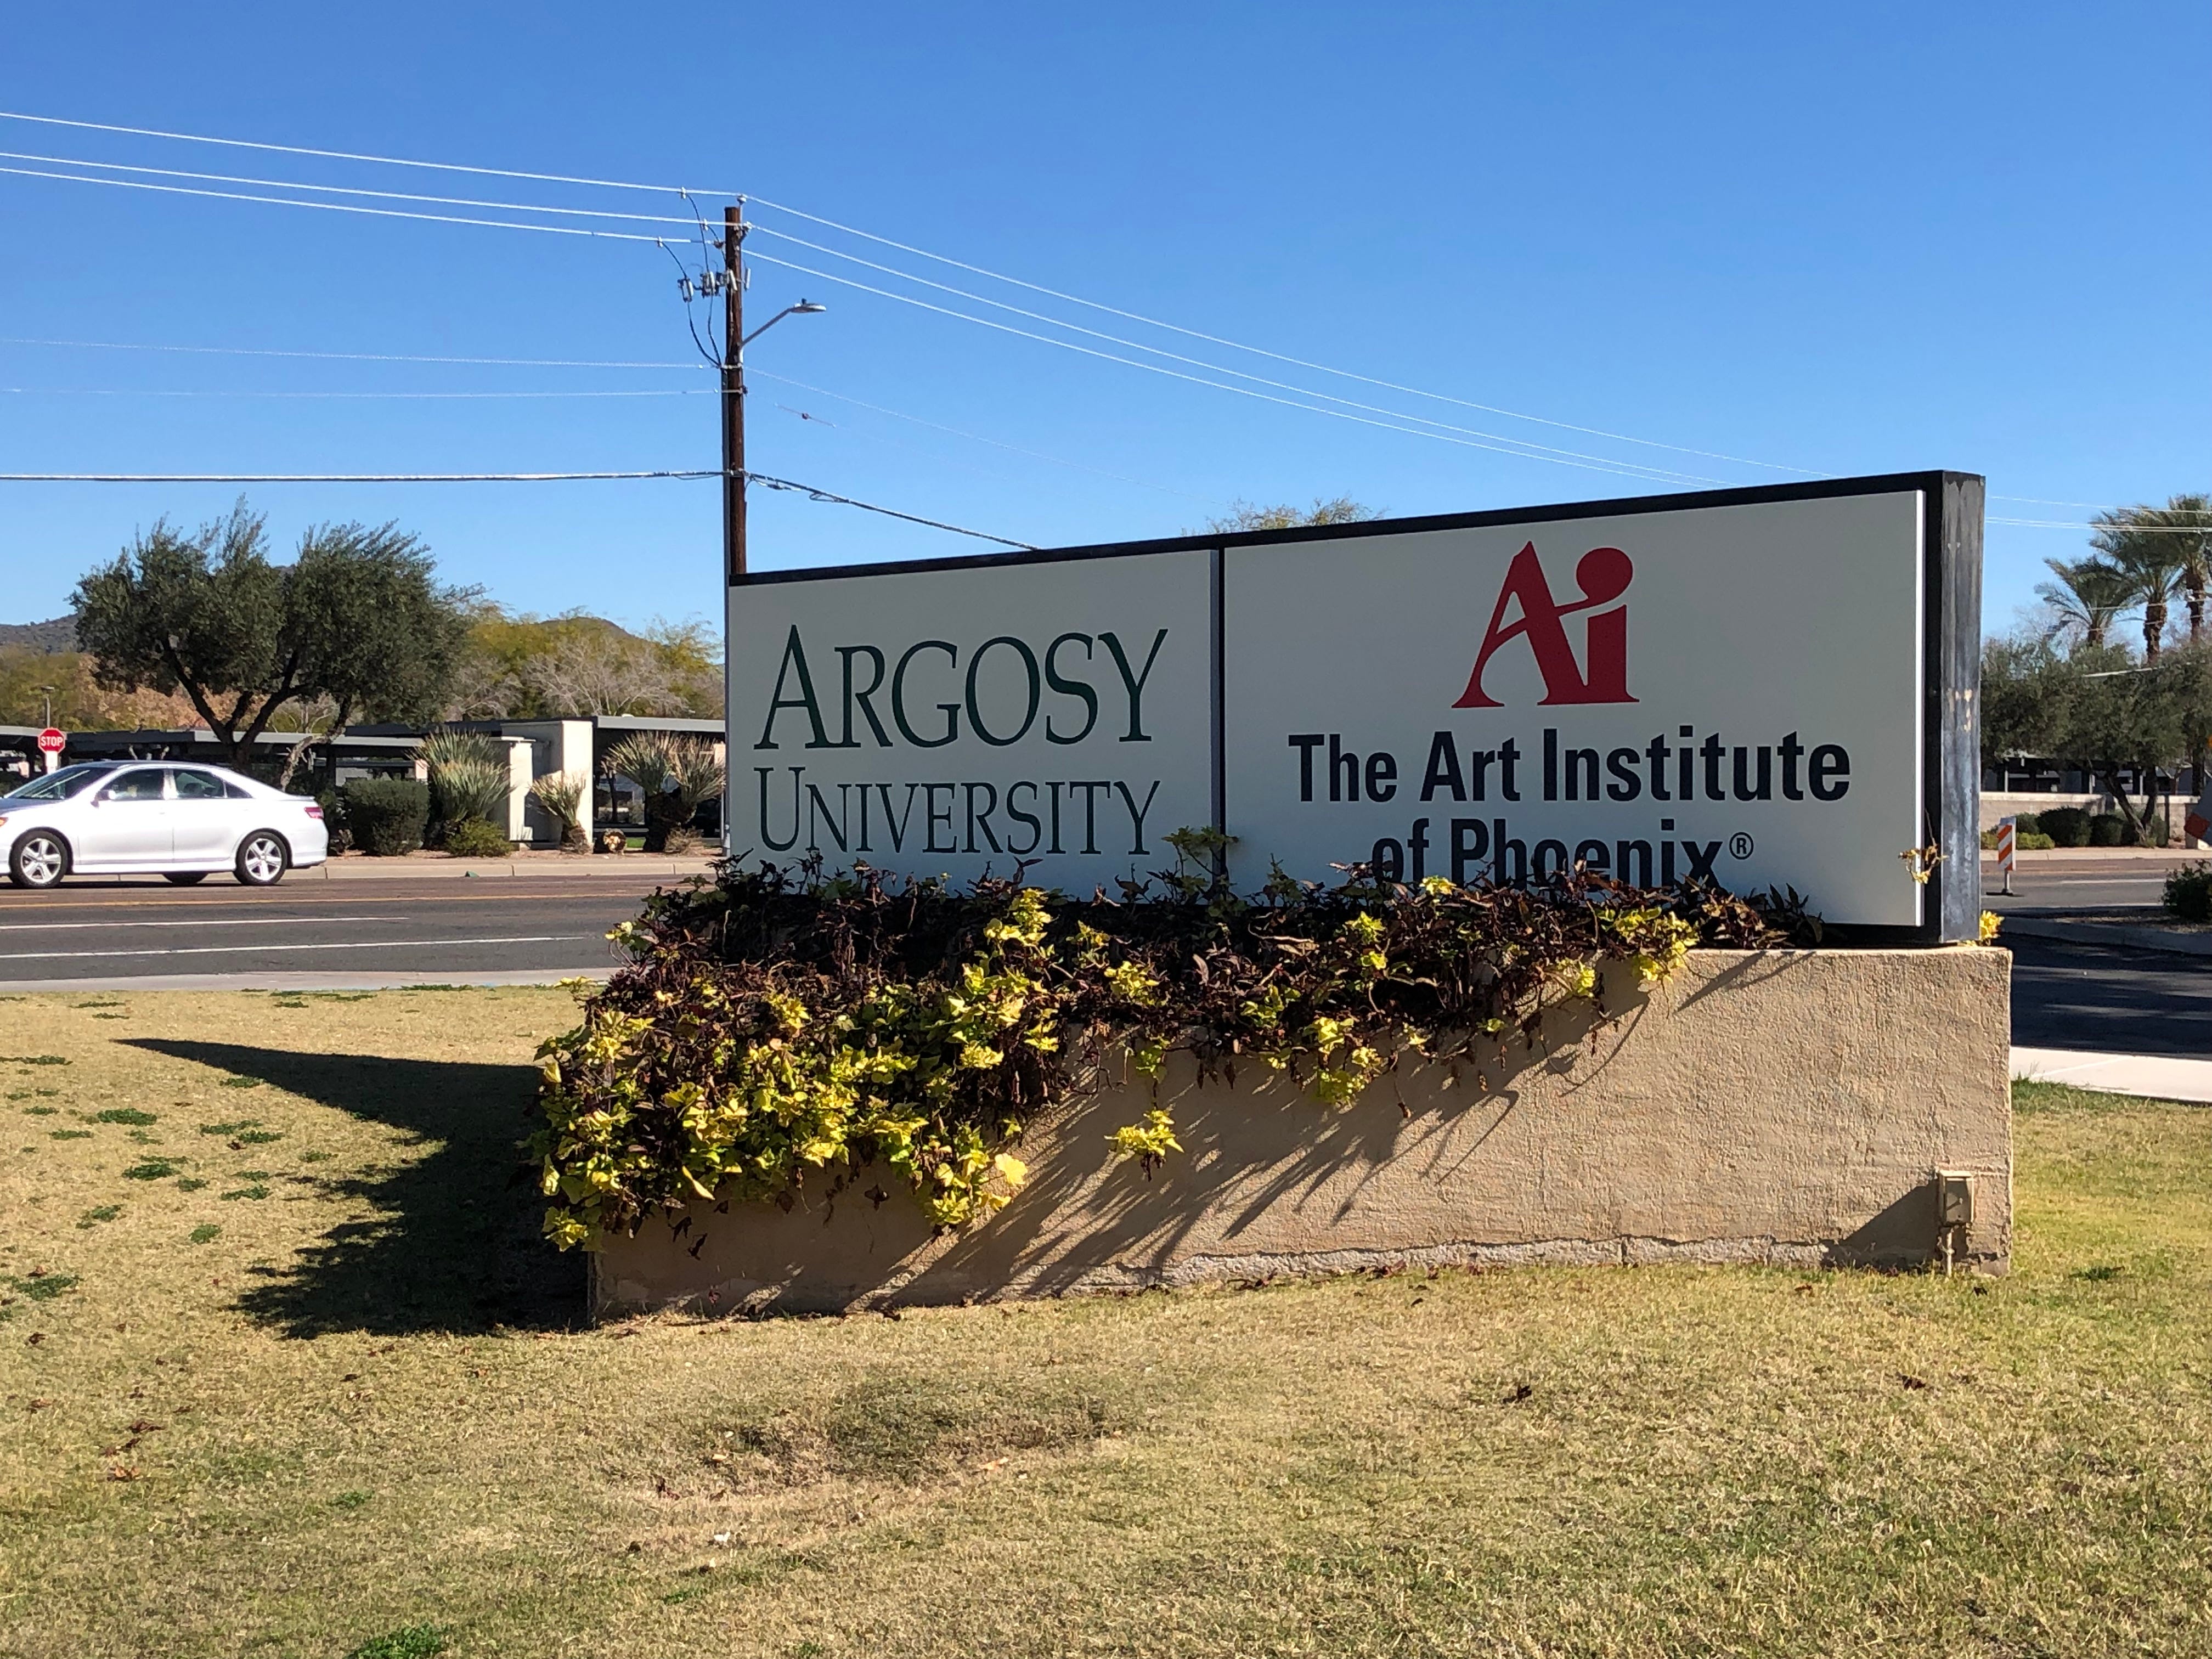 Argosy University in Phoenix is withholding financial aid for students, who can&apos;t pay bills